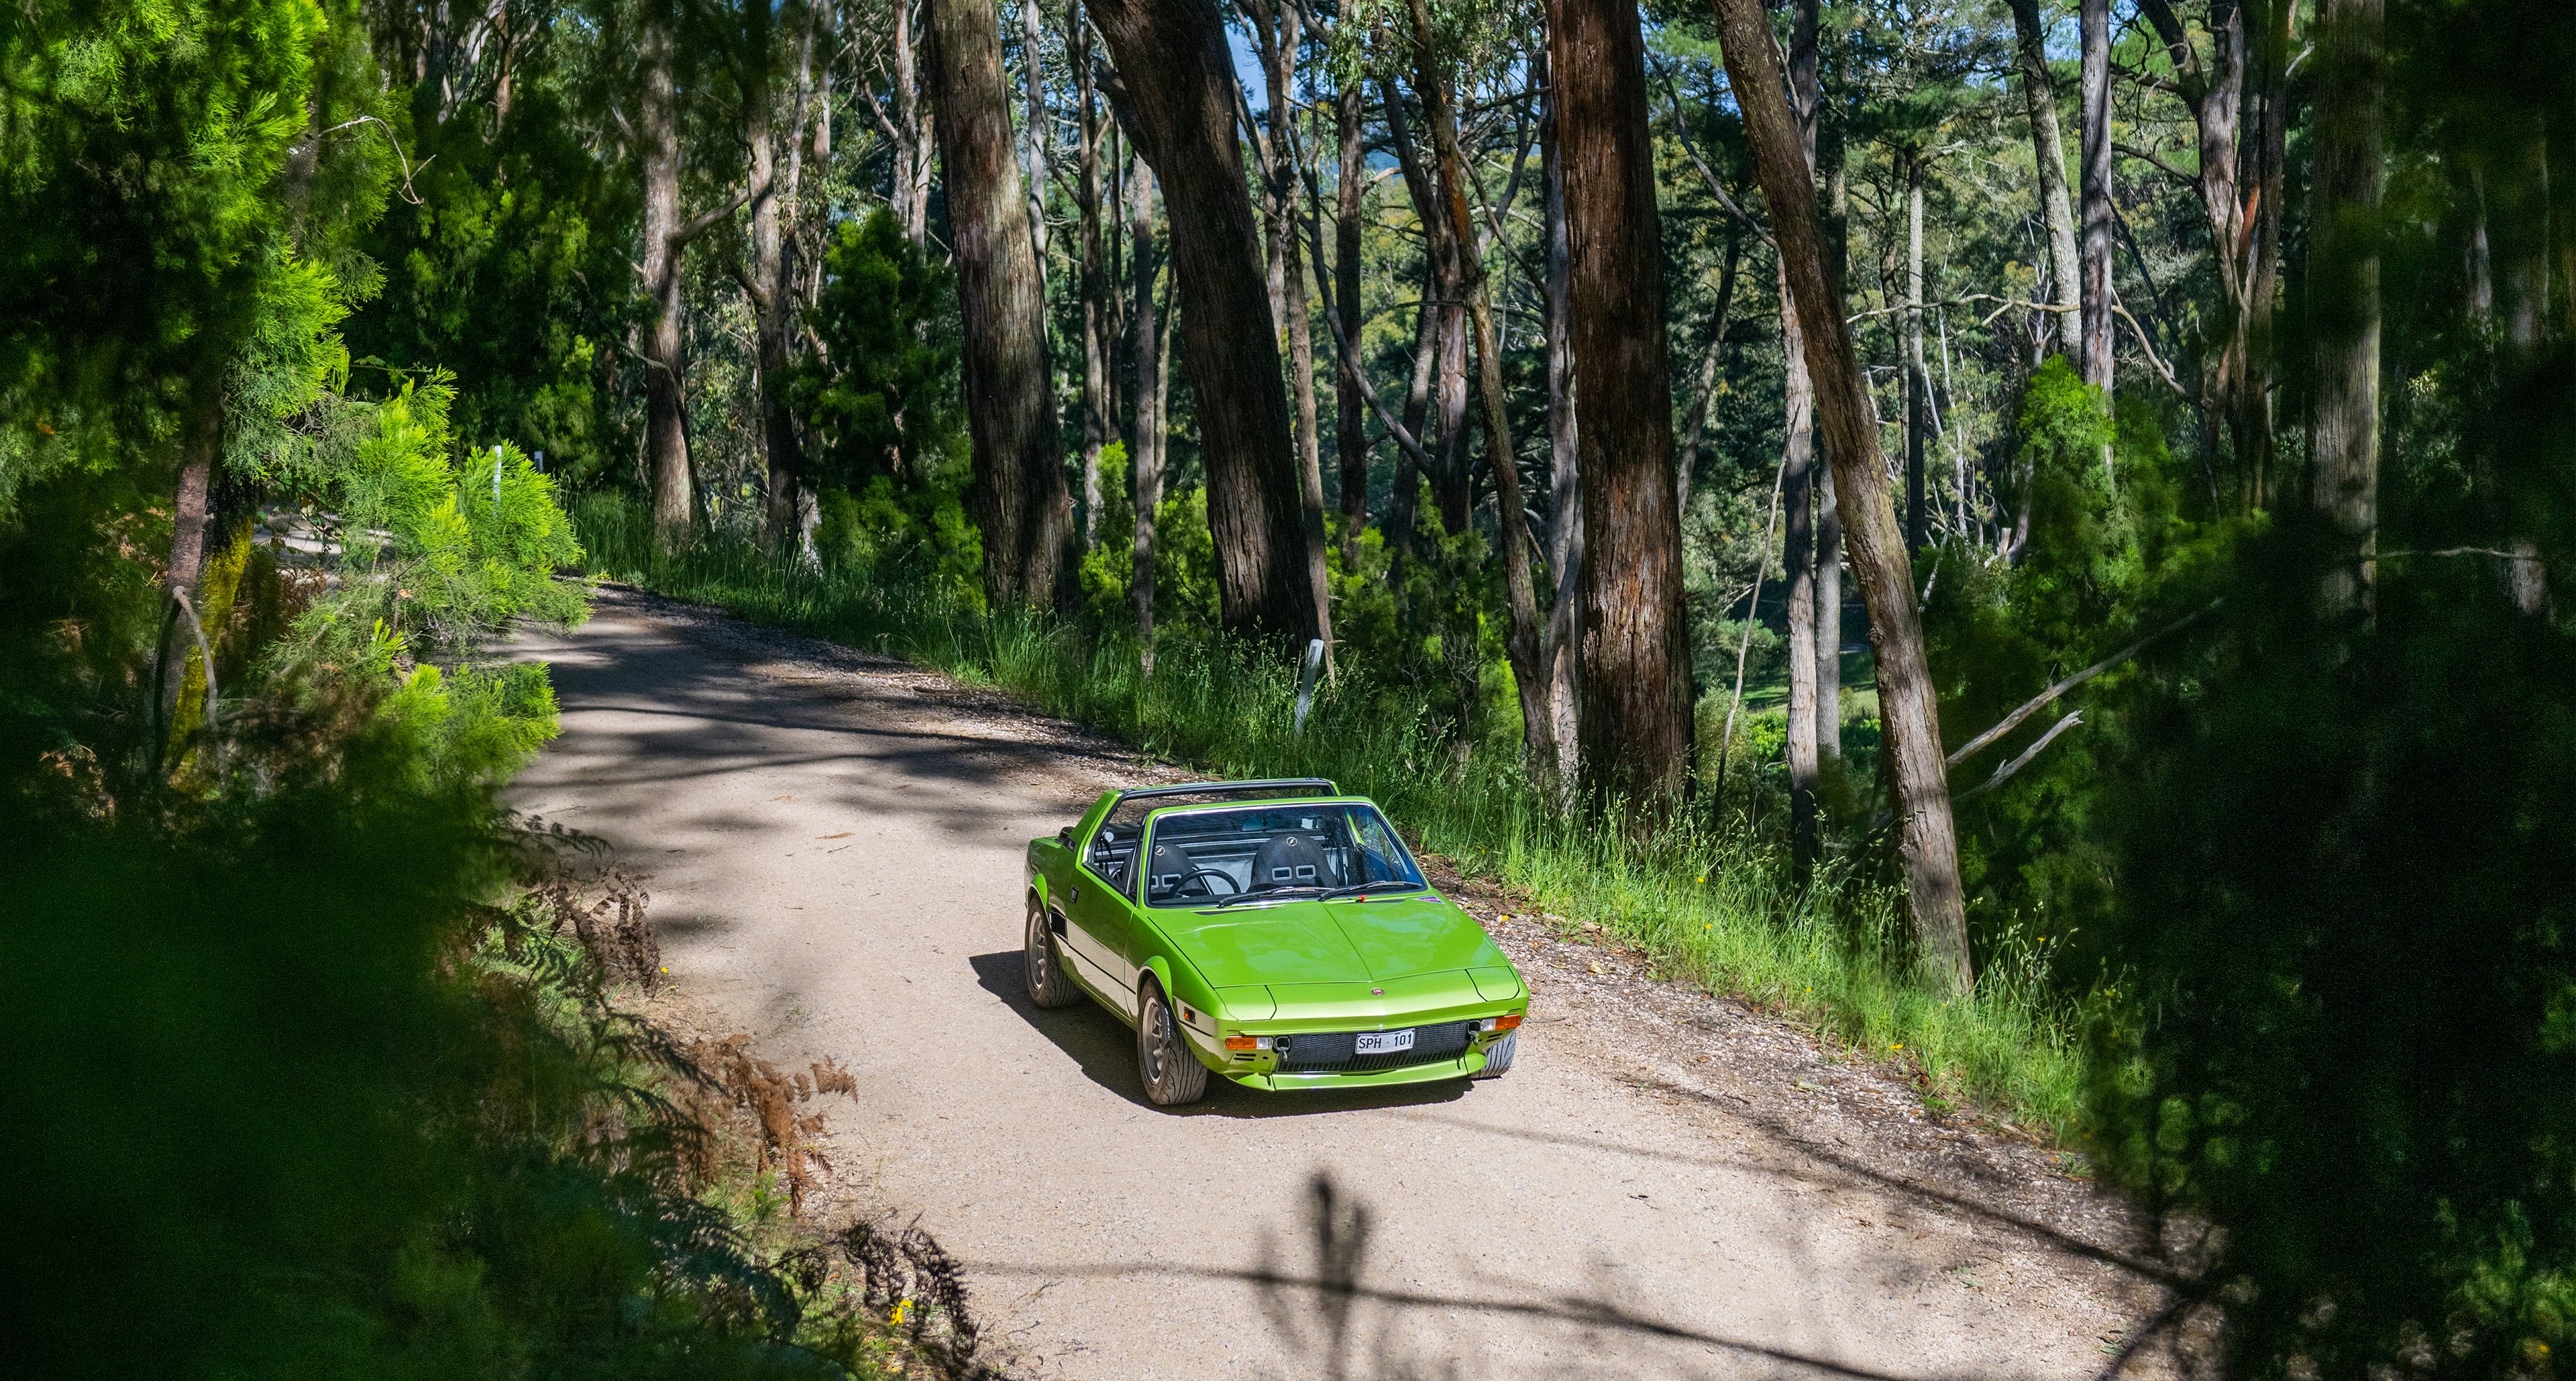 Does anyone love the Fiat X1/9 as much as this Australian owner?